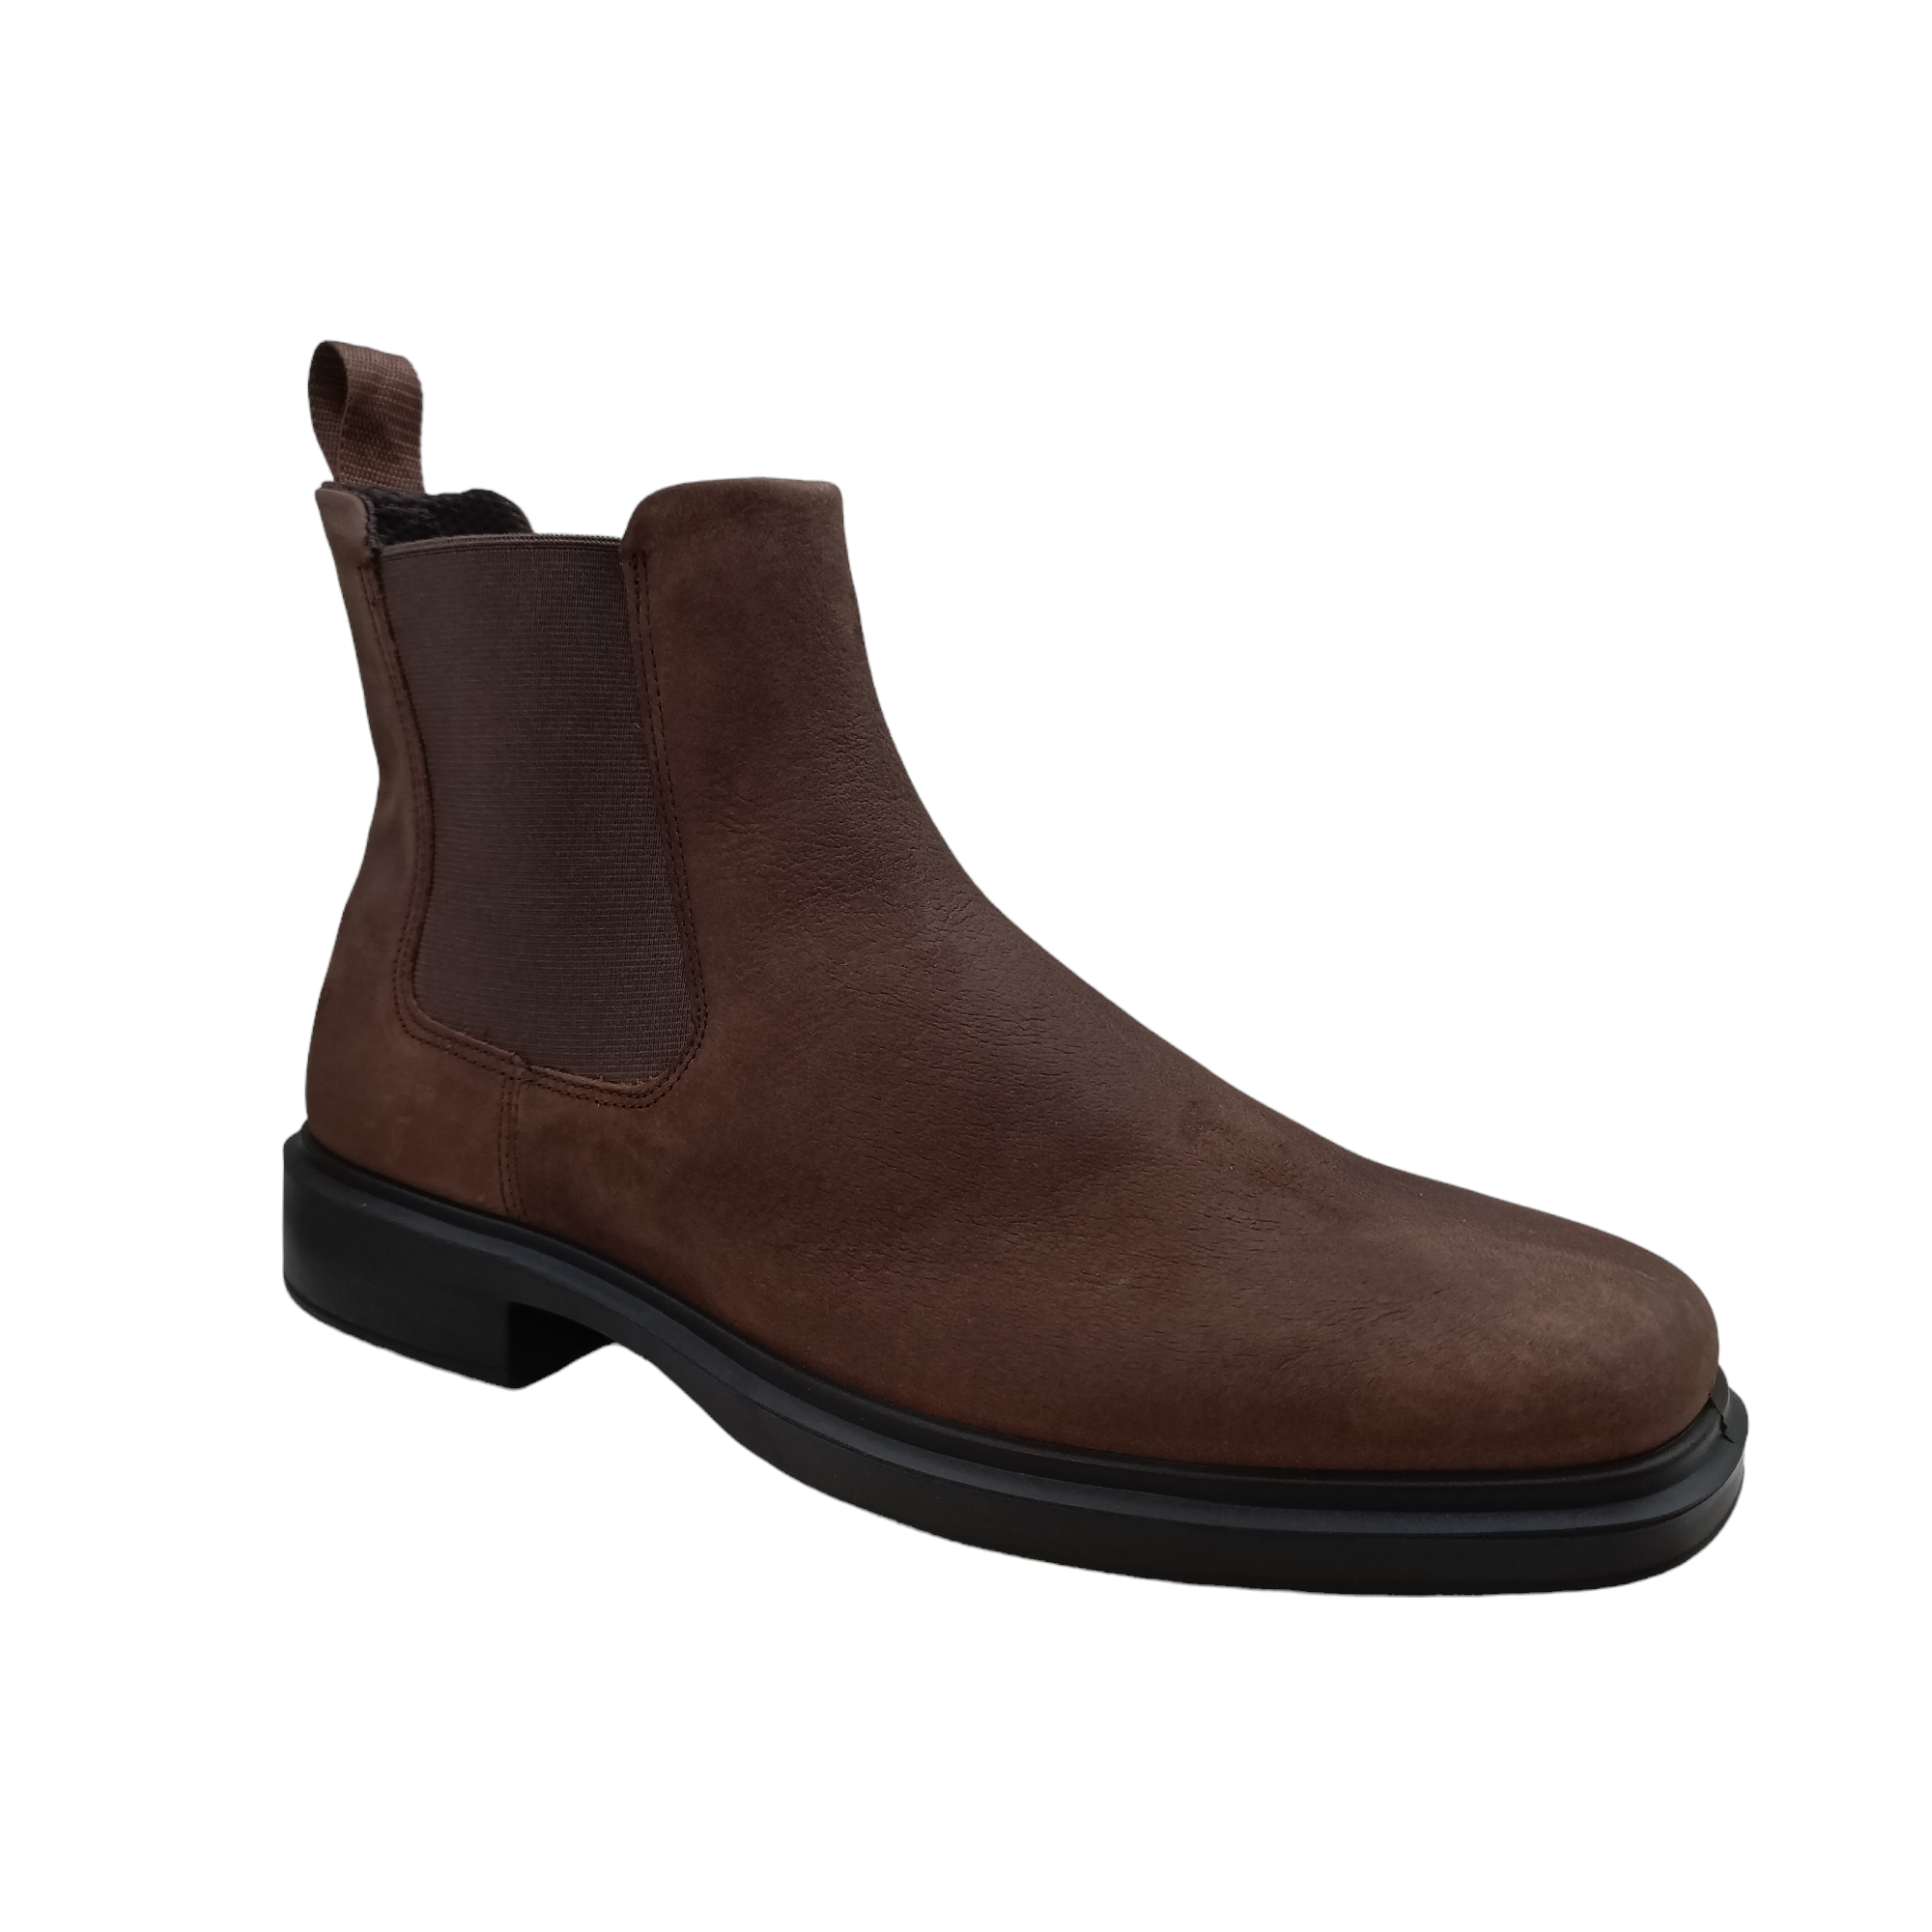 Shop Helsinki 2 M - with shoe&amp;me - from Ecco - Boots - Boot, Mens, Winter